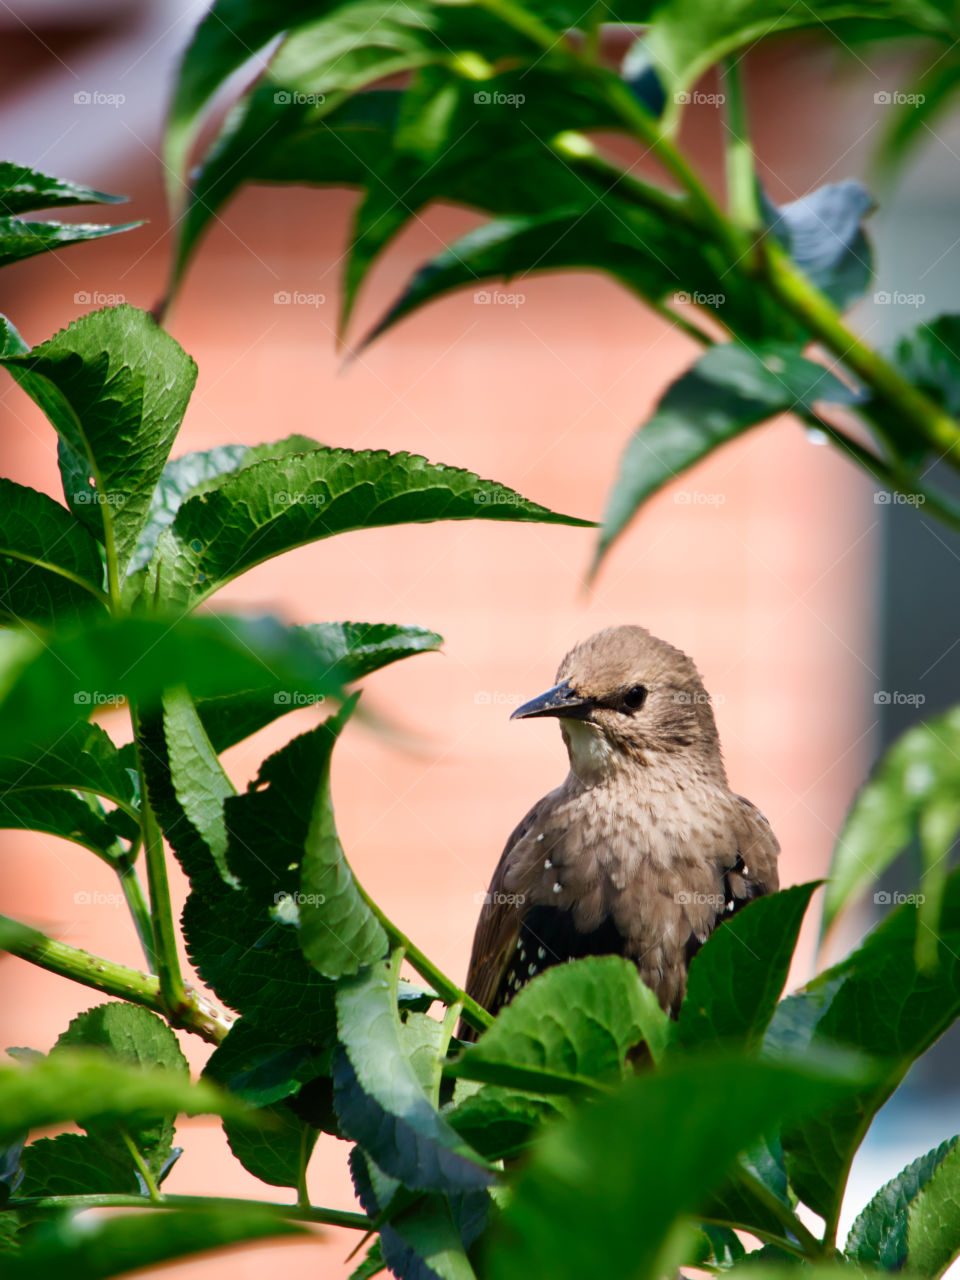 Baby starlings in the bushes